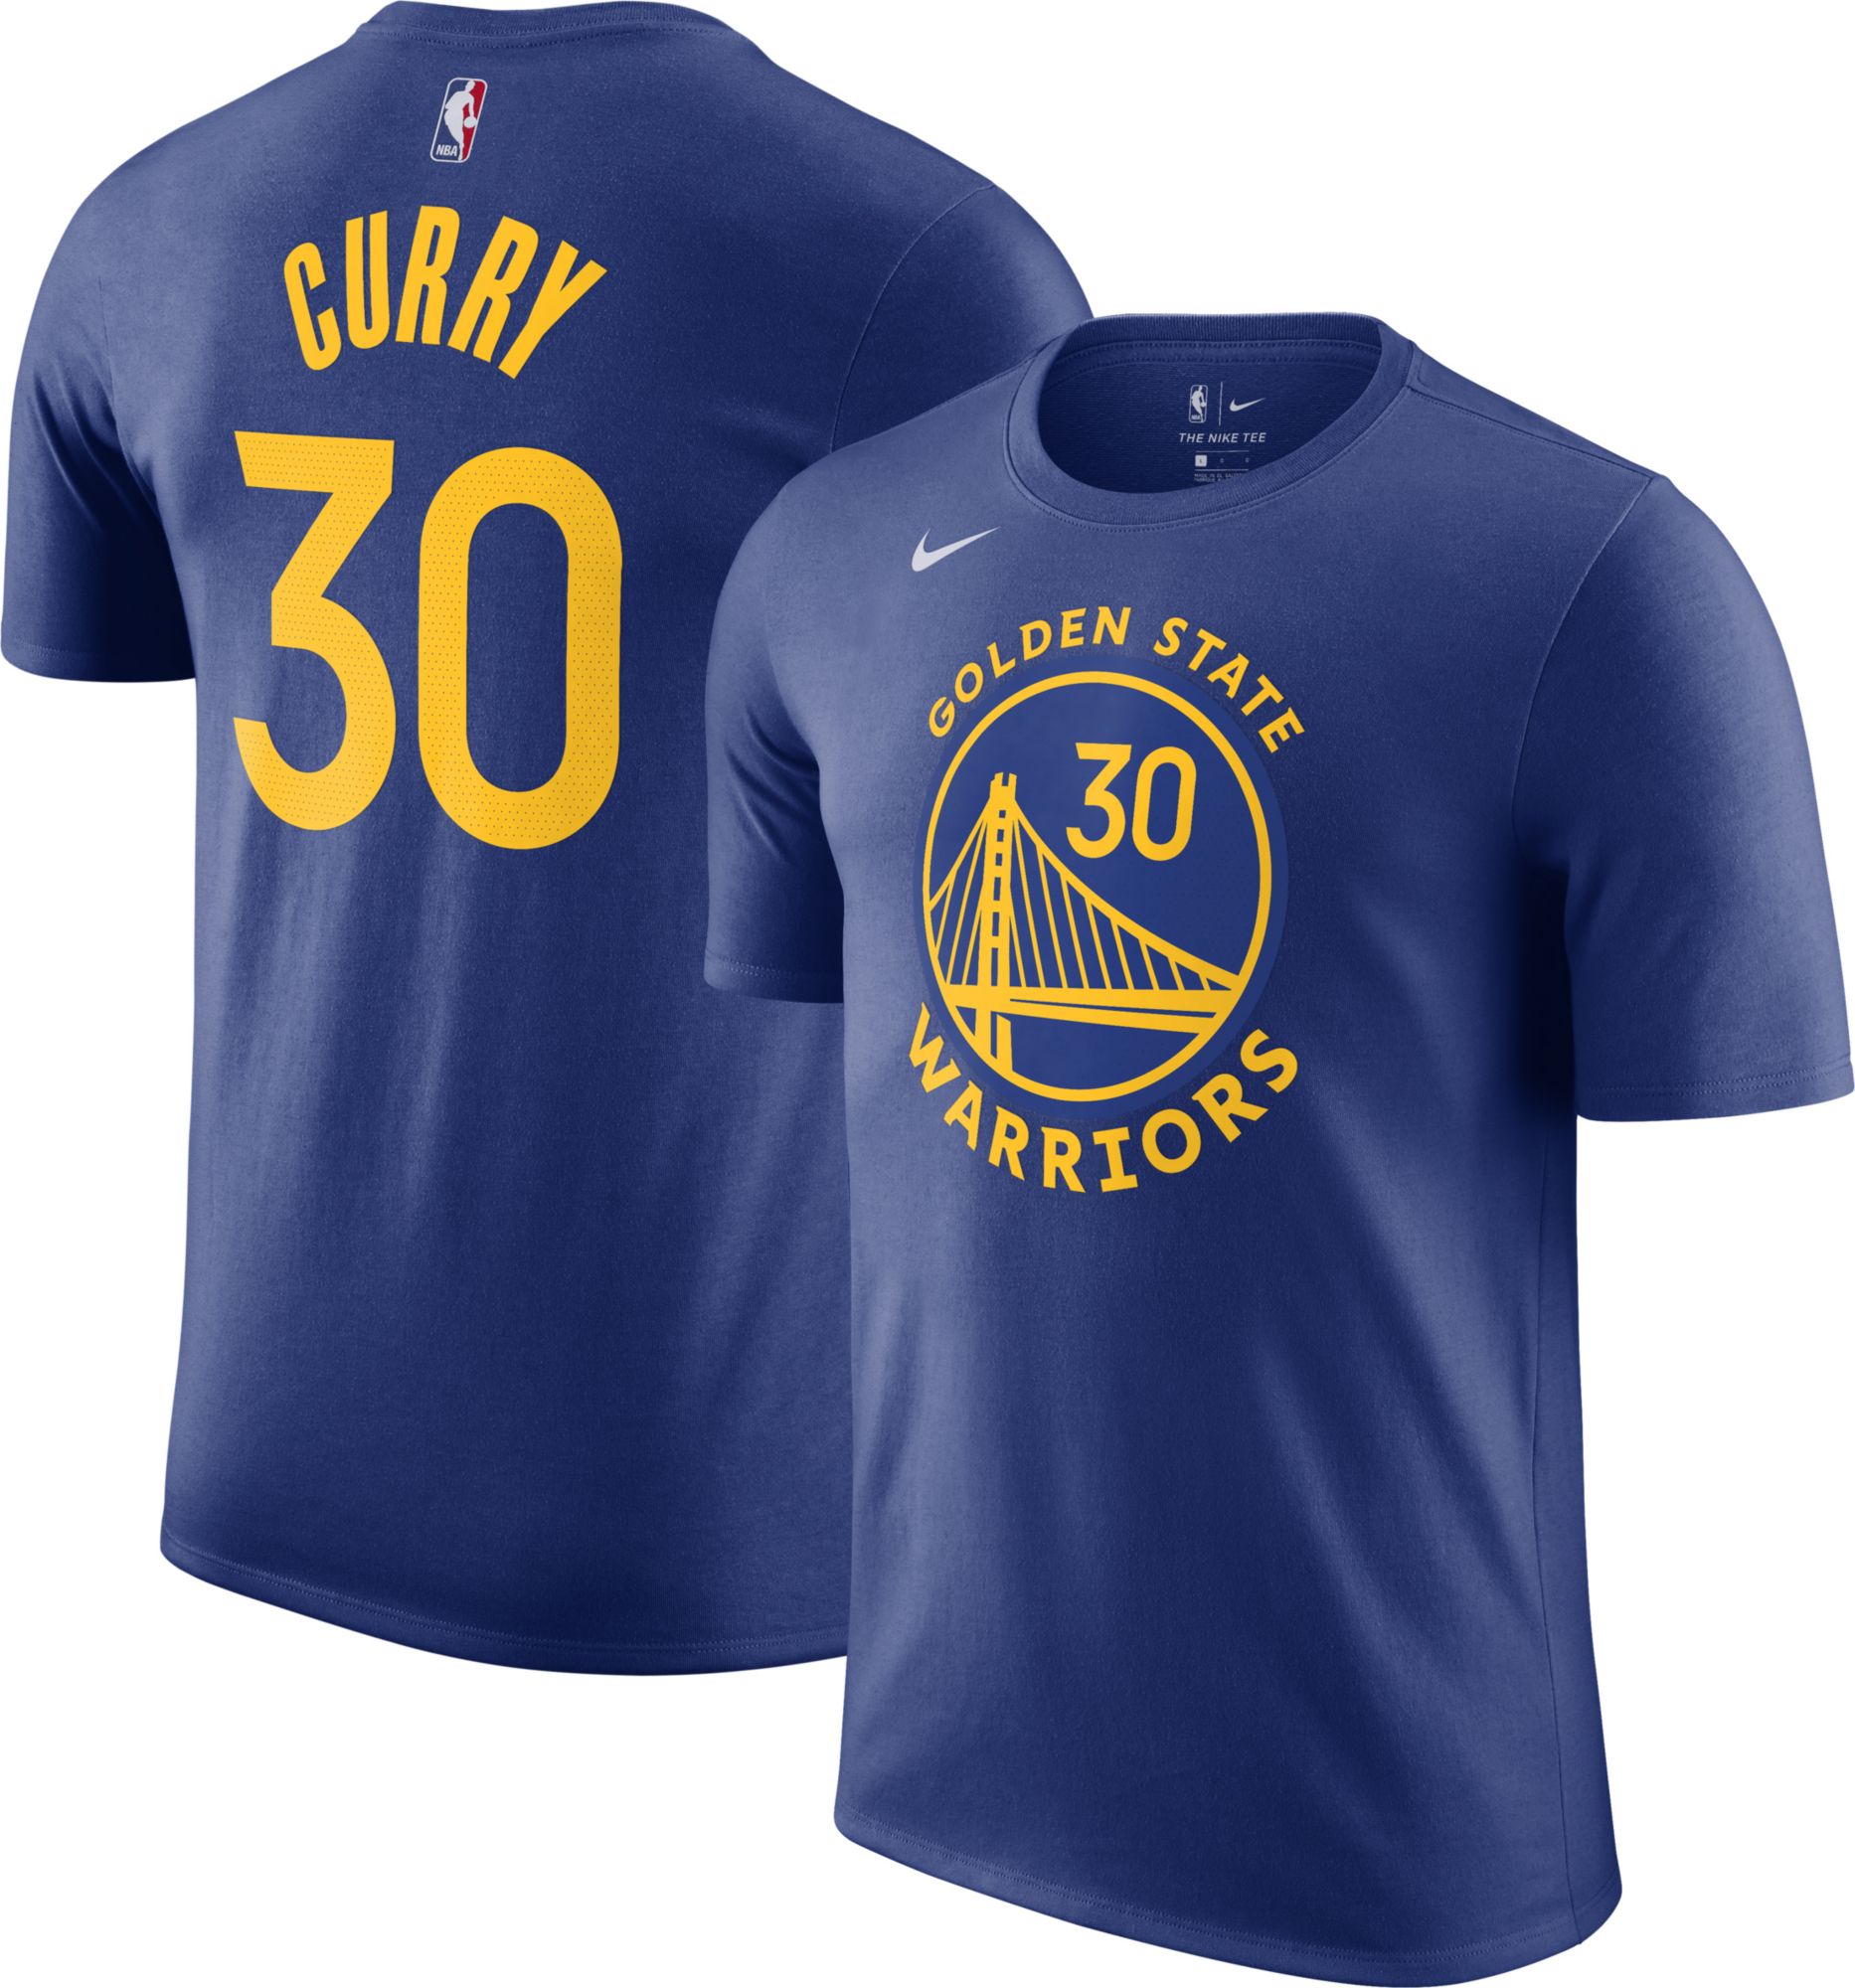  Stephen Curry Golden State Warriors Black #30 Youth 8